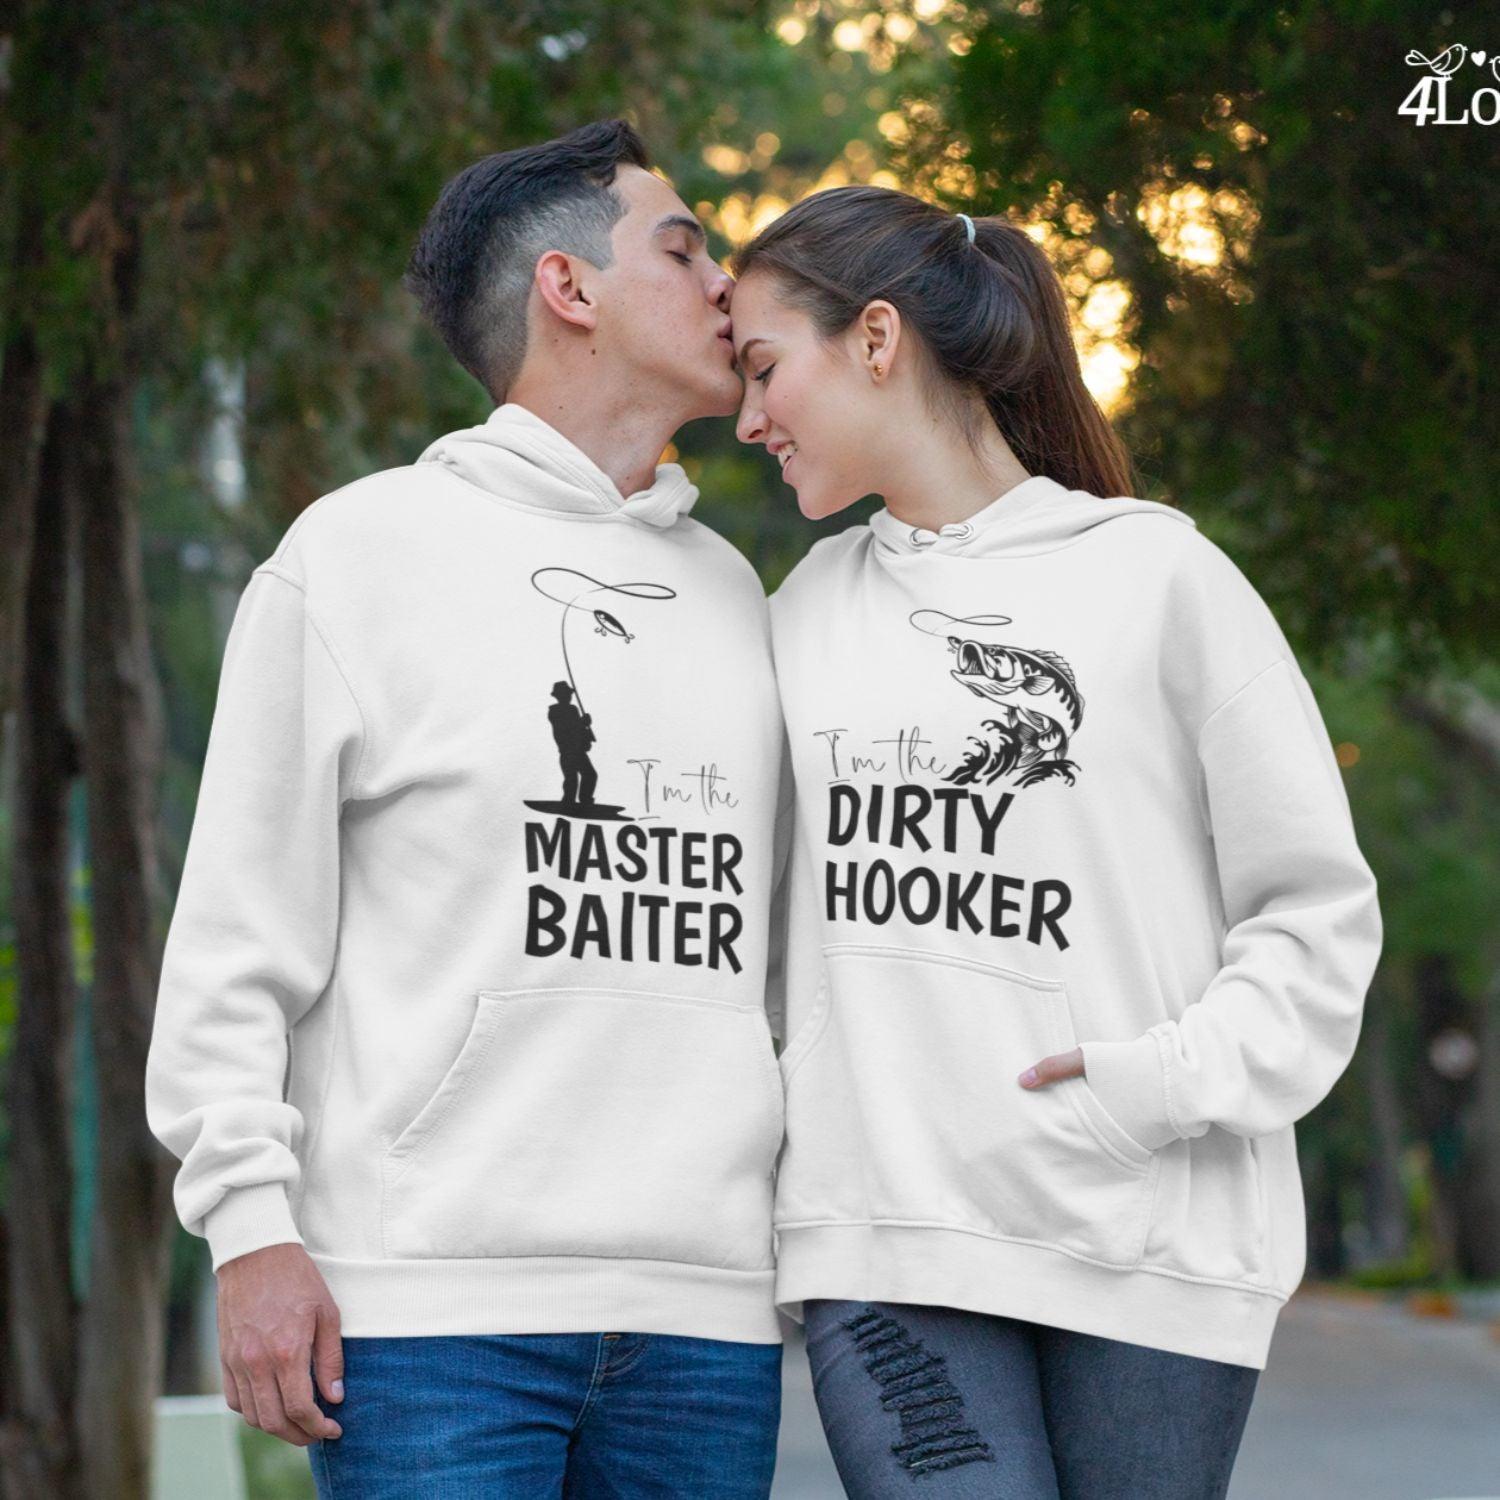 dirty couples shirts